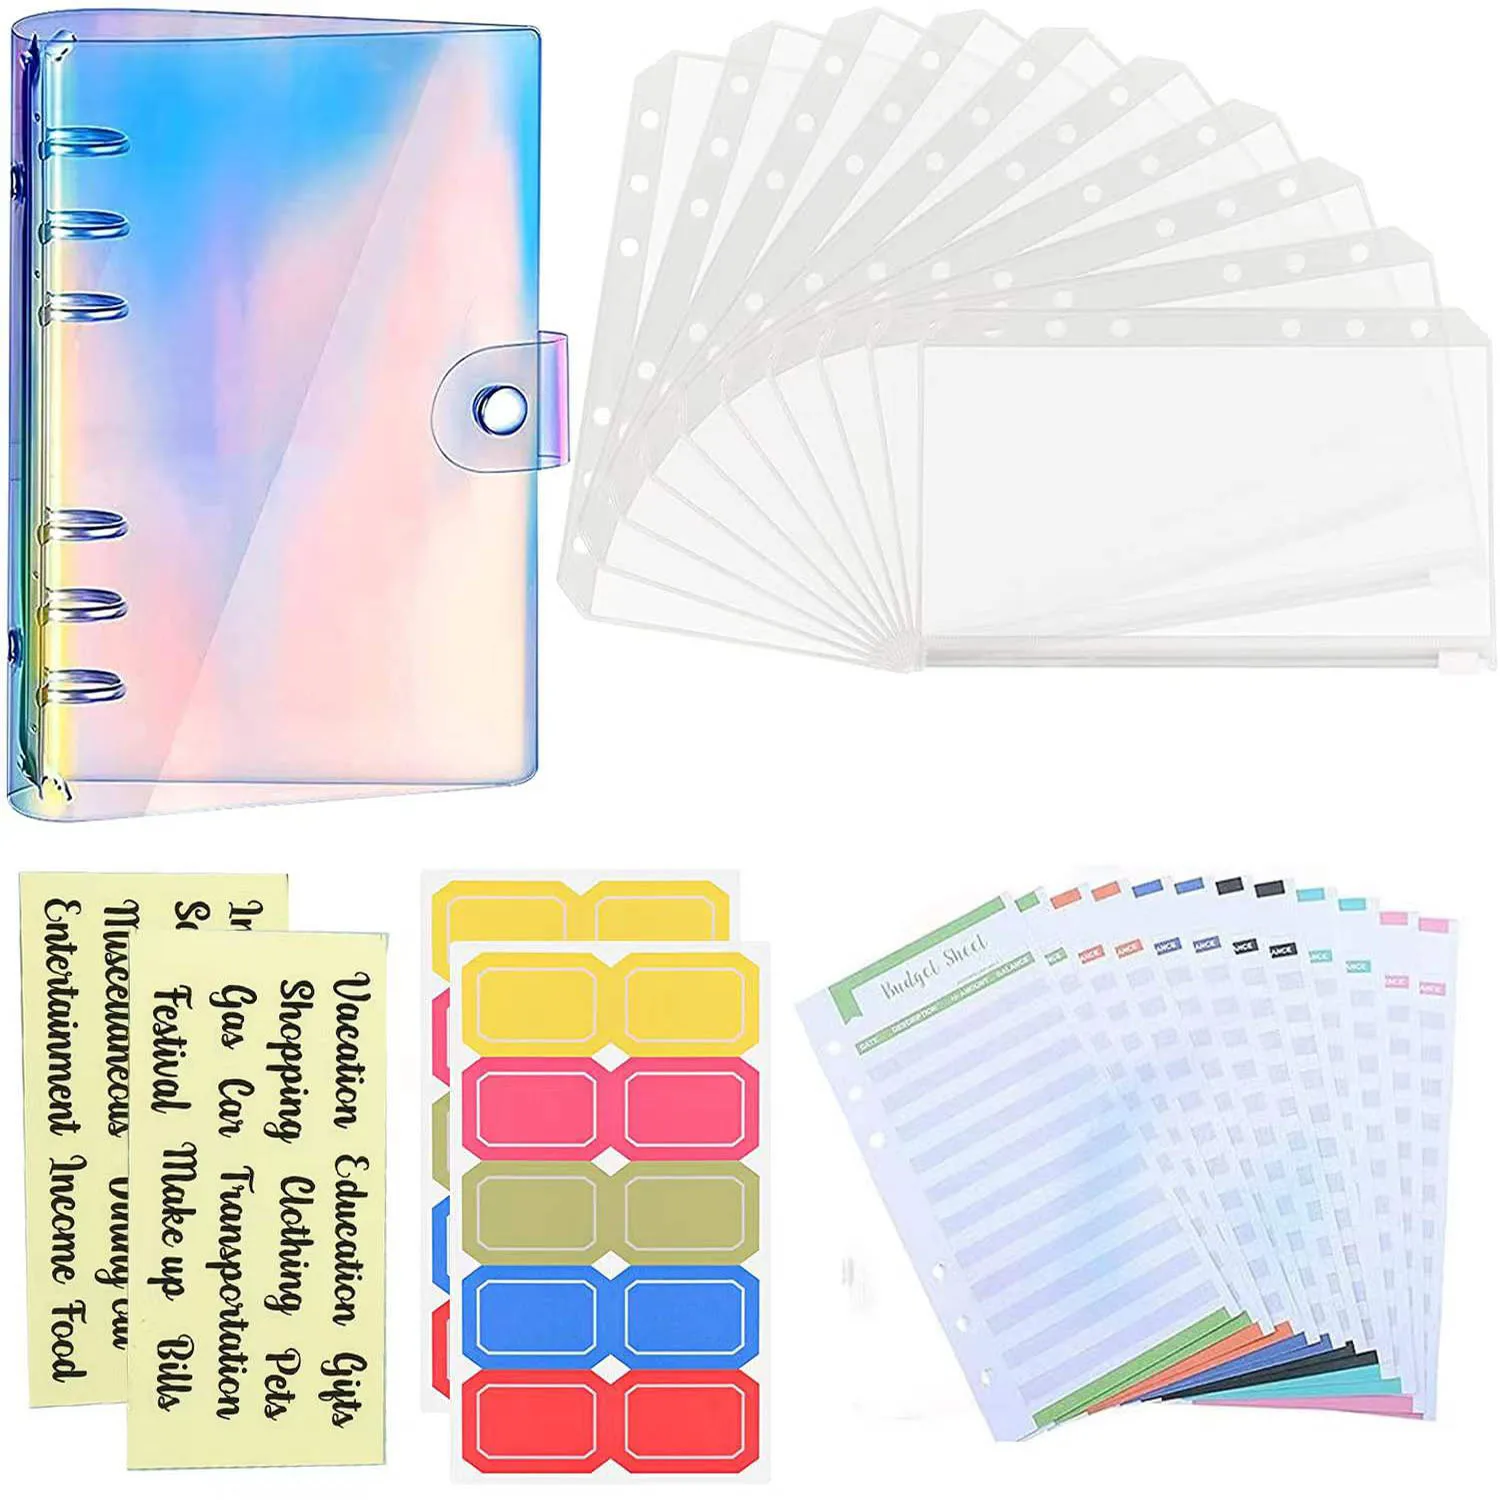 A6 Budget Binder Waterproof Cash Envelopes Notebook Organizer System with 10 Zipper Pockets,12 Budget Sheet and Label Stickers 26 pieces a6 binder pvc notebook cover budget envelopes planner organizer with binder zipper pockets budget sheets